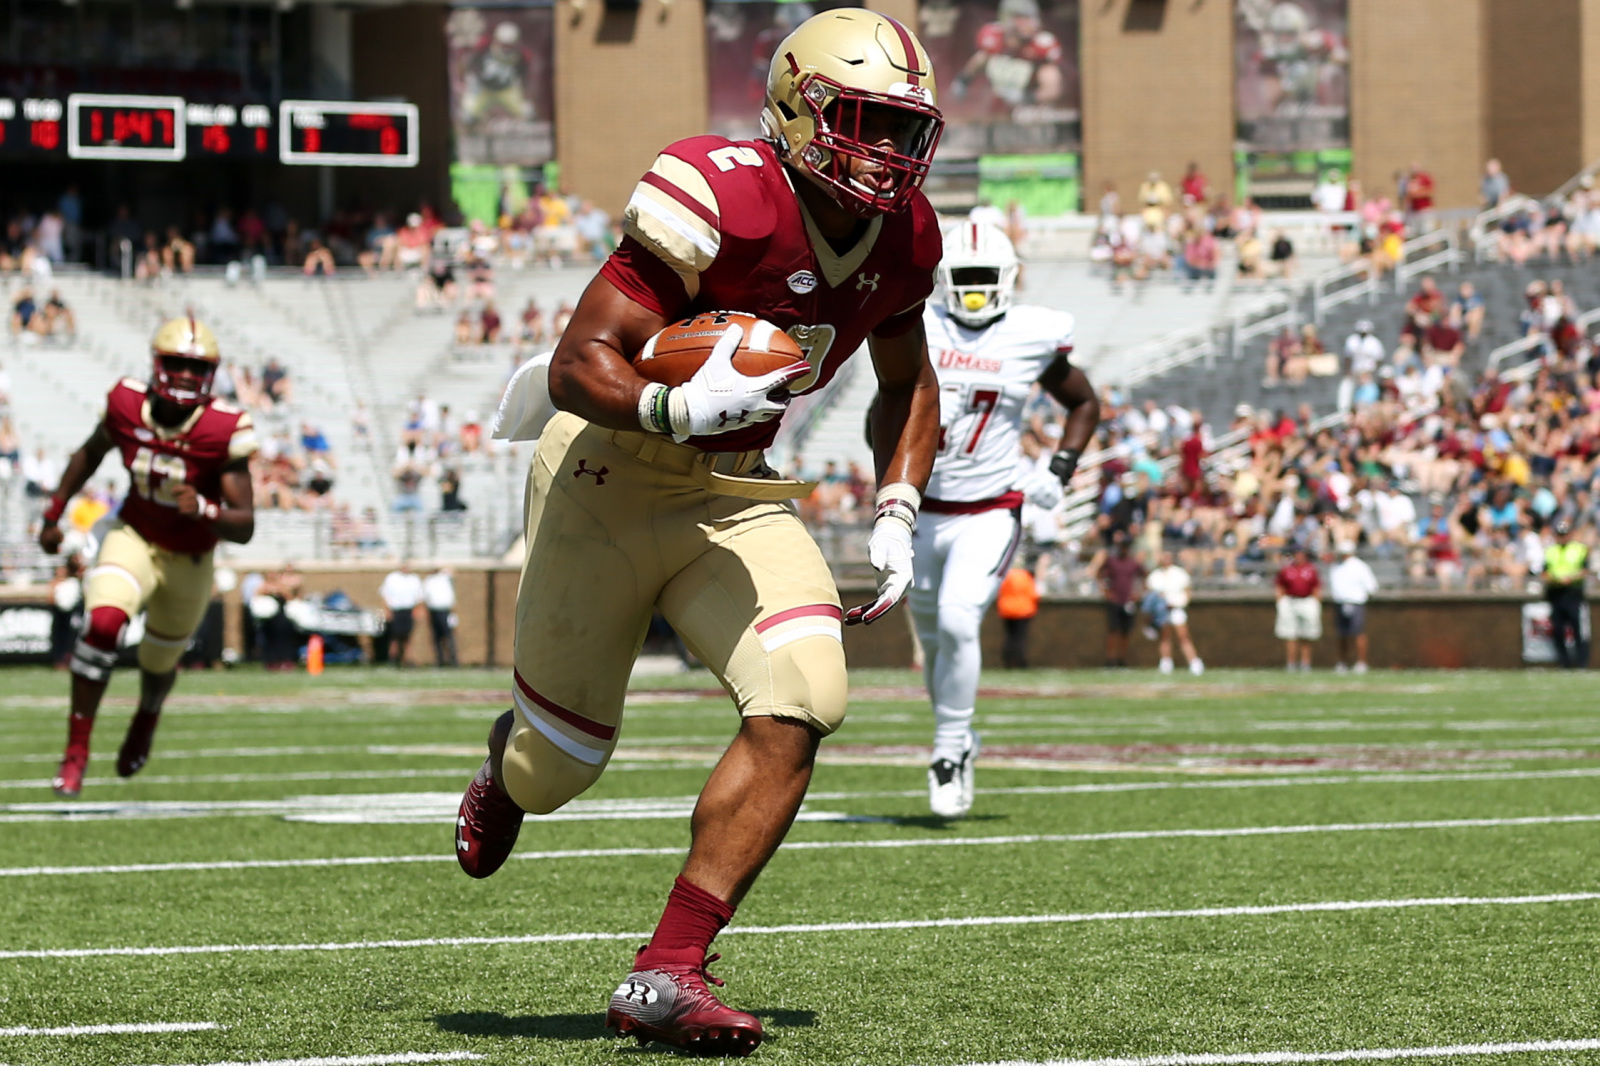 Boston College tailback AJ Dillon is one of many talented college